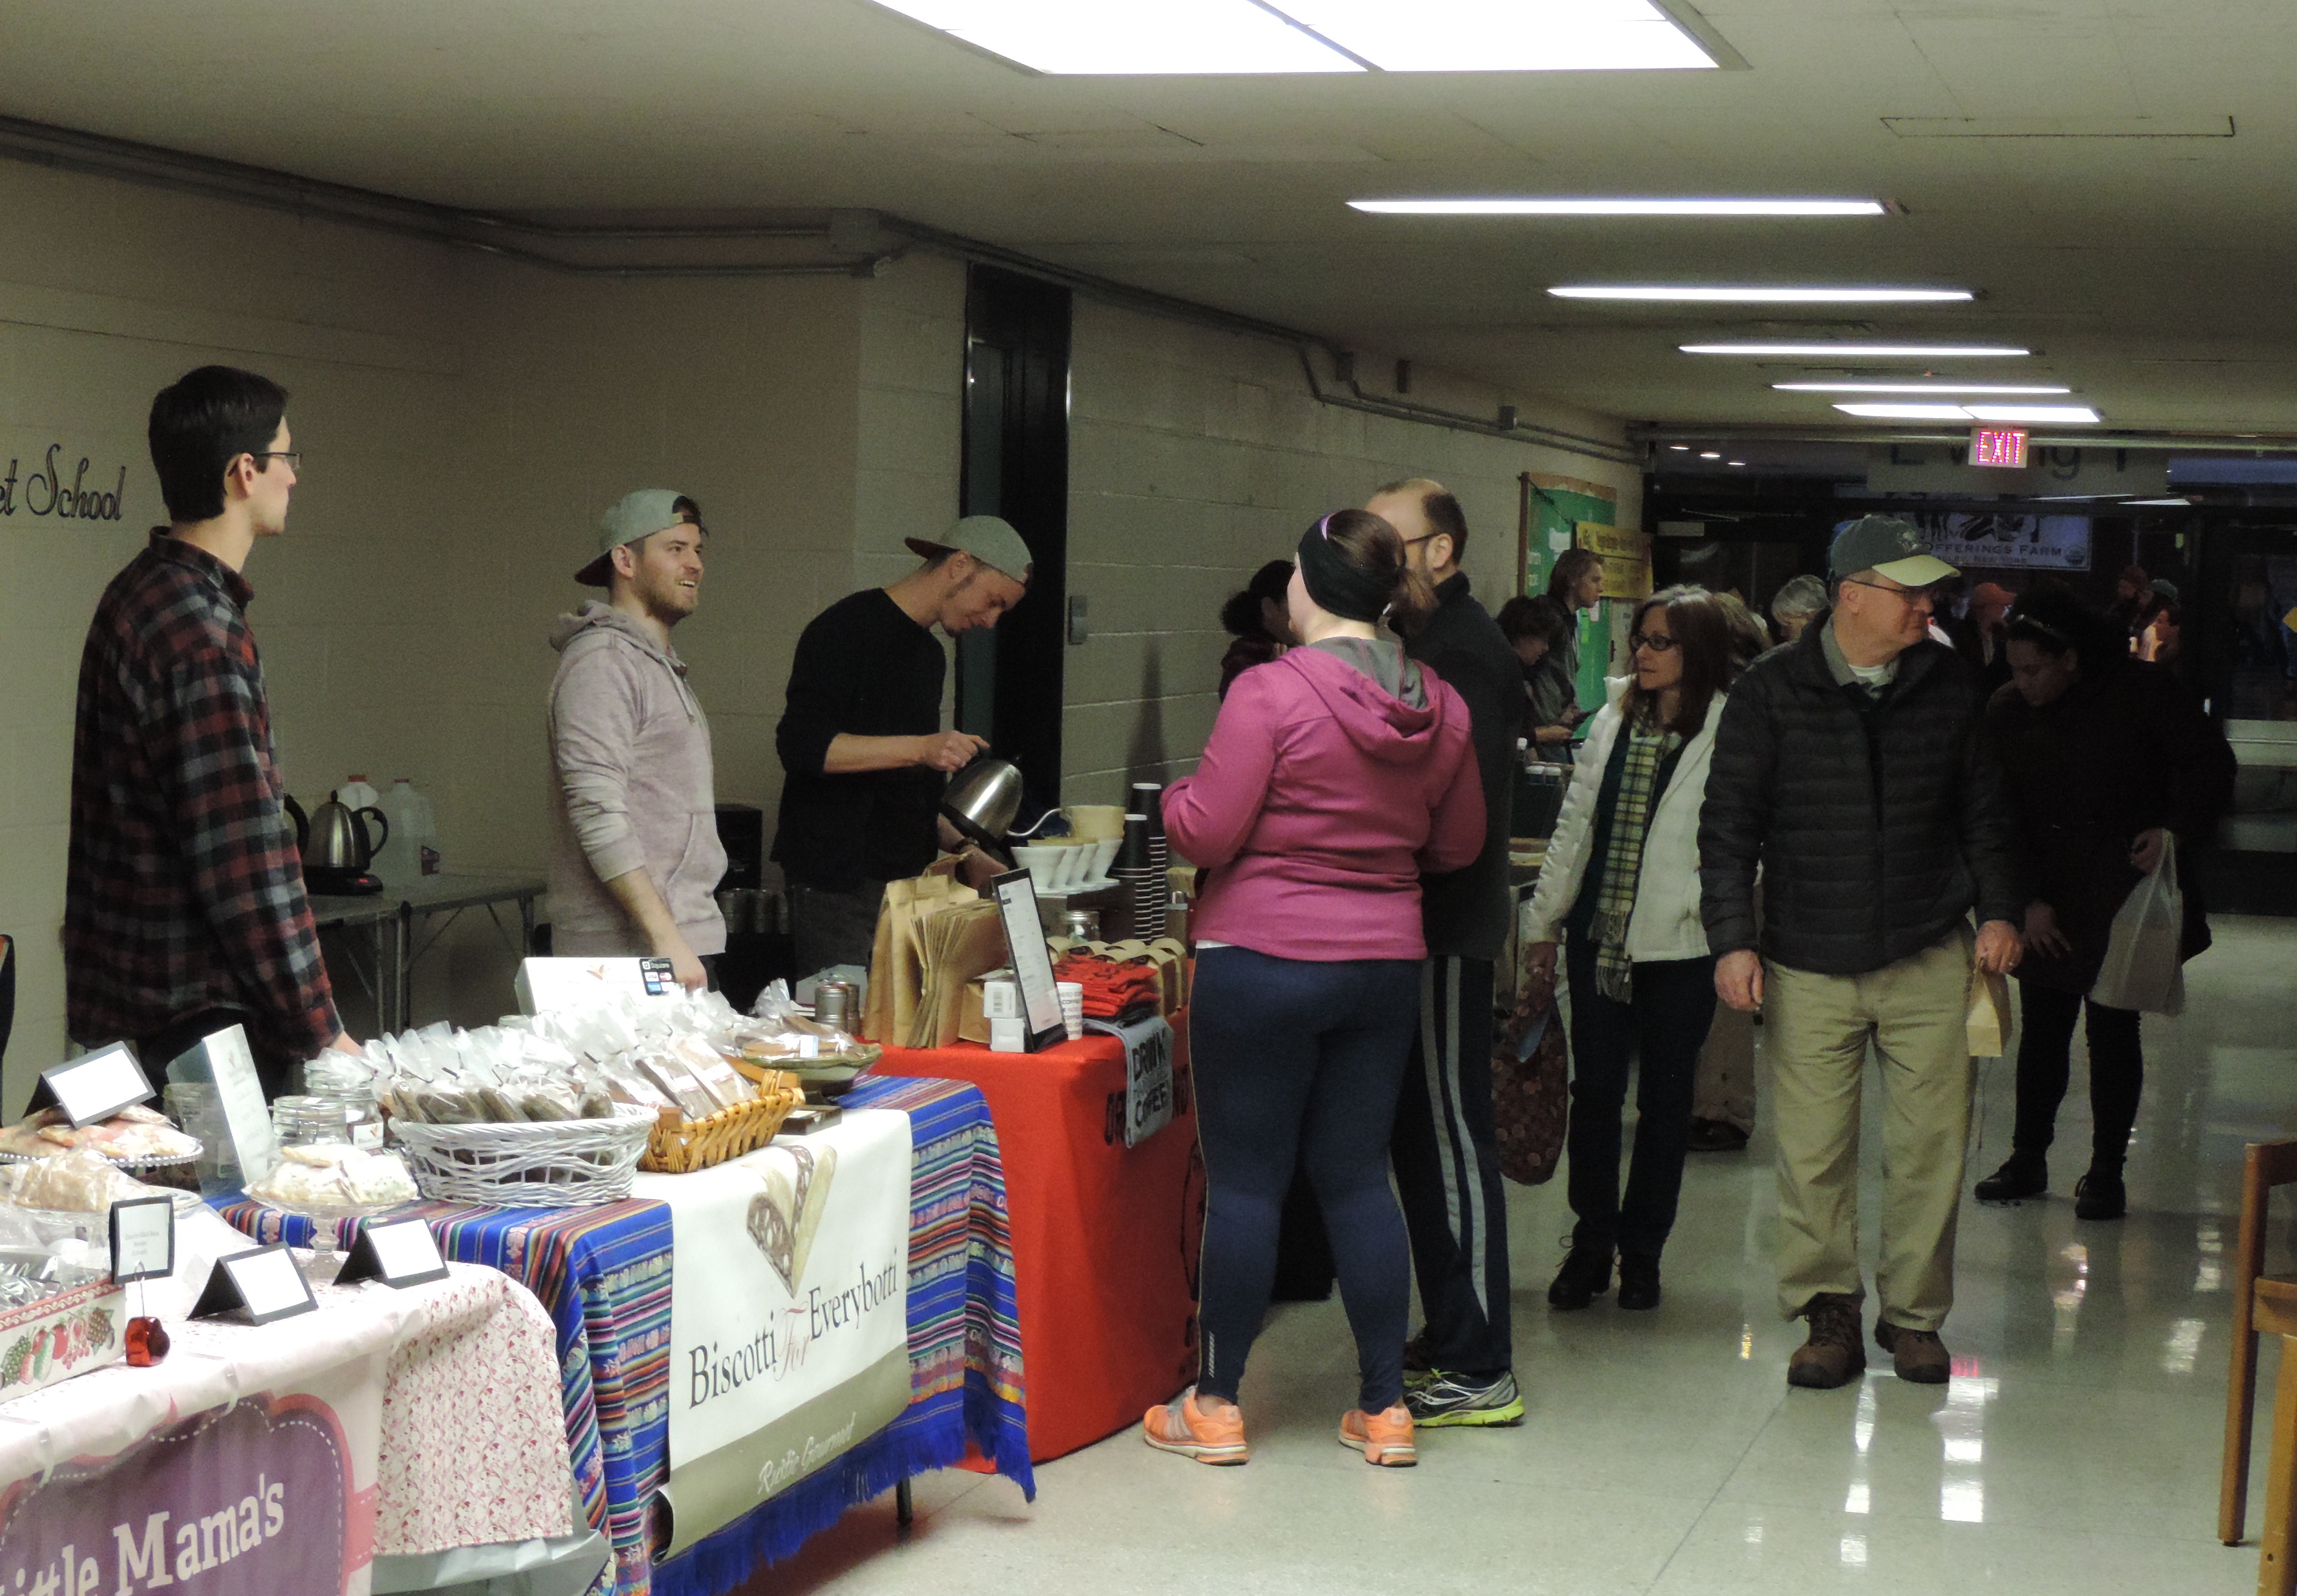 Elmwood Village Winter Market at Buffalo State continues on February 6